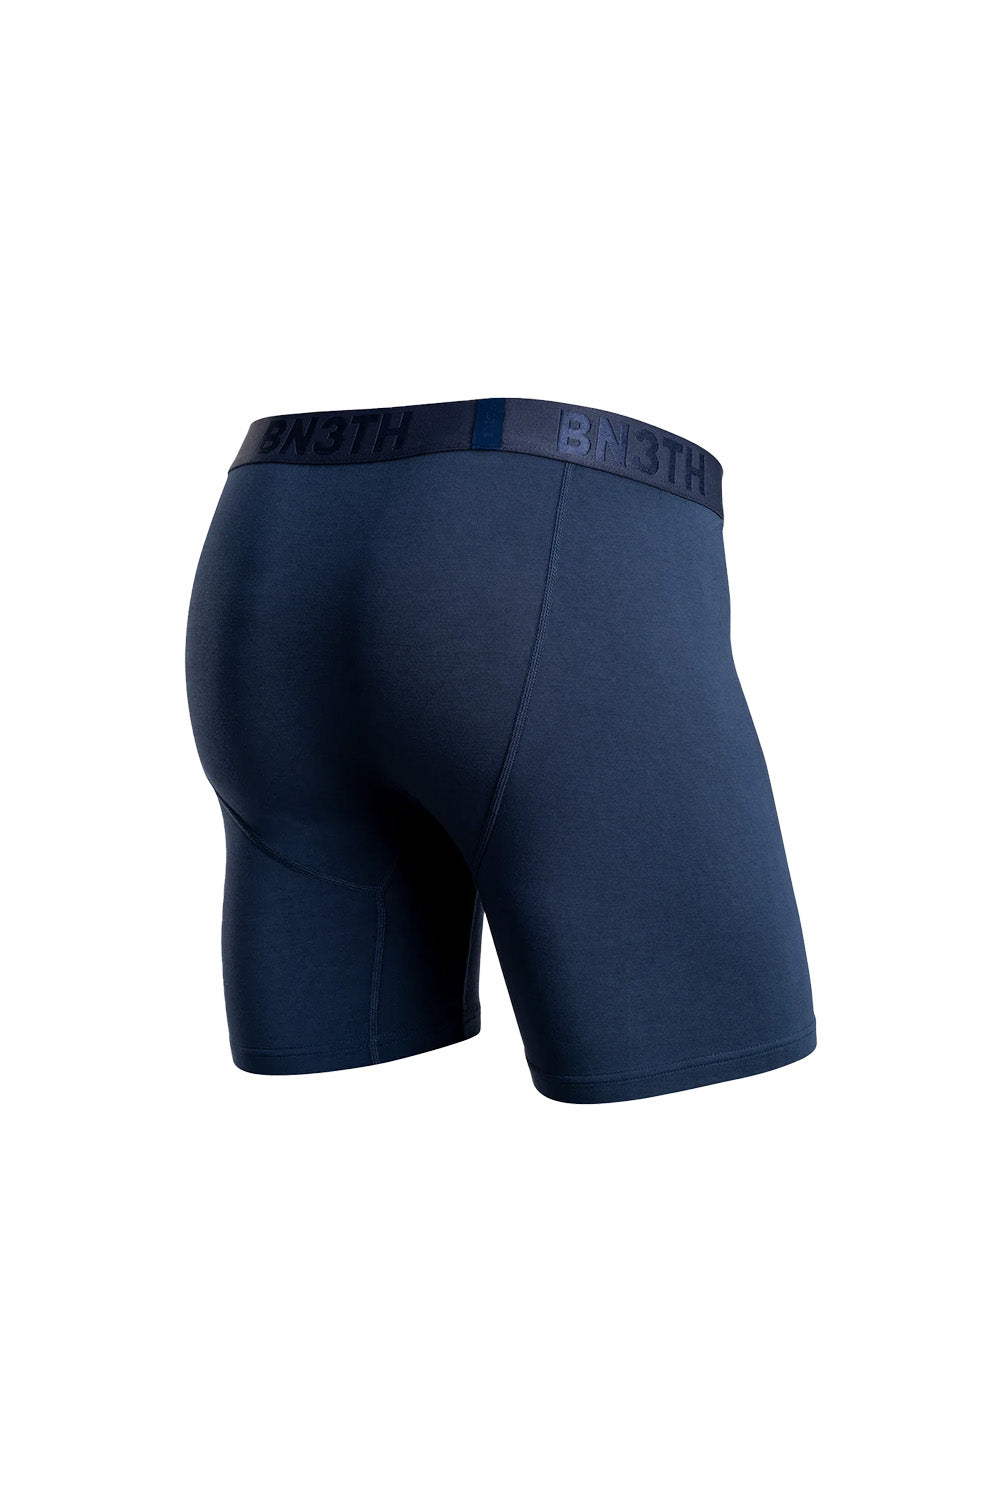 BN3TH - Classics Boxer Brief - Solid Navy - Back